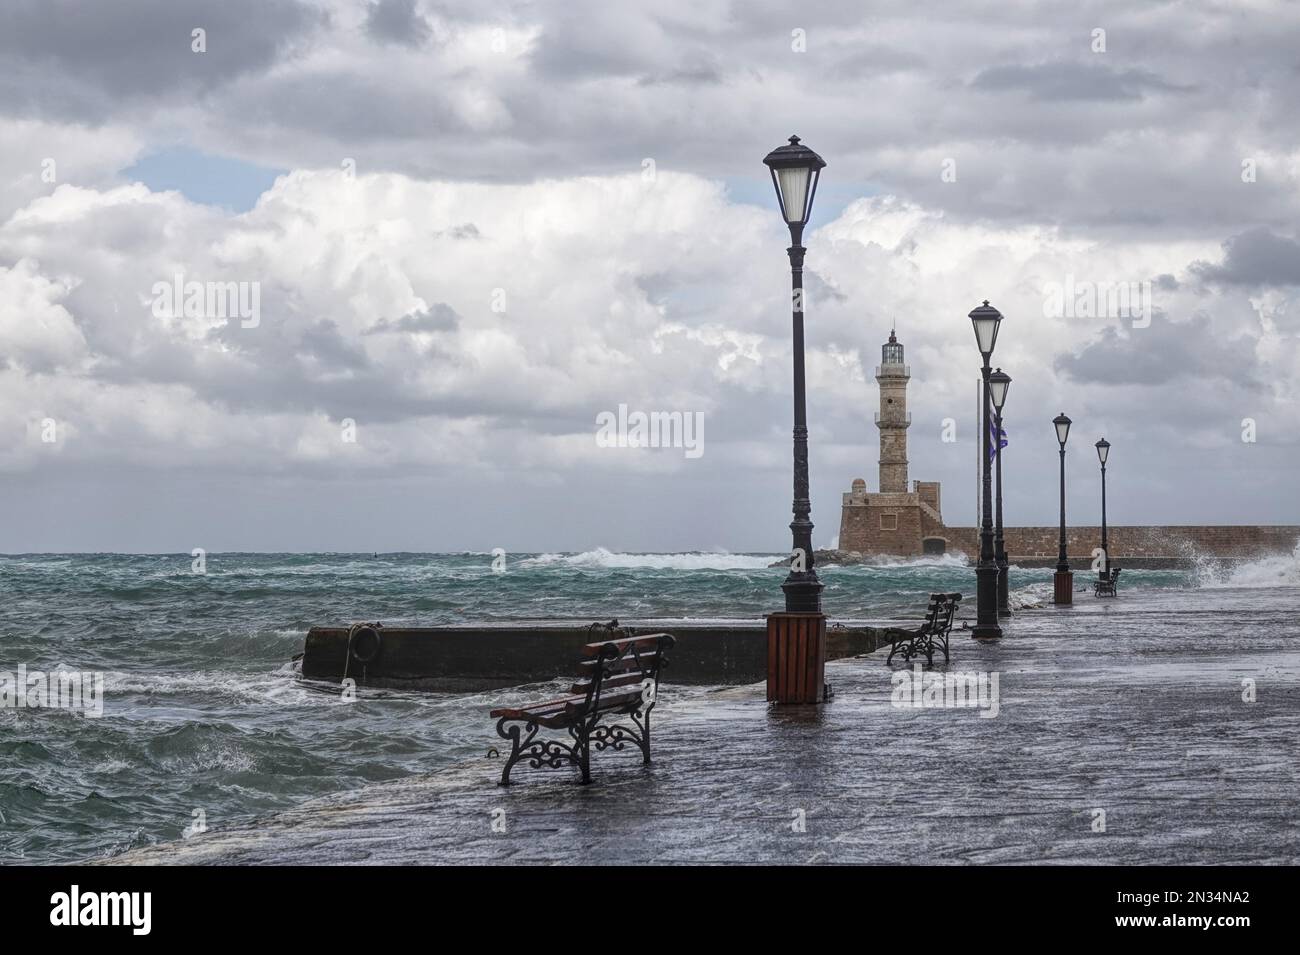 The Venetian harbour of Chania old town in Crete, Greece, after a heavy storm Stock Photo